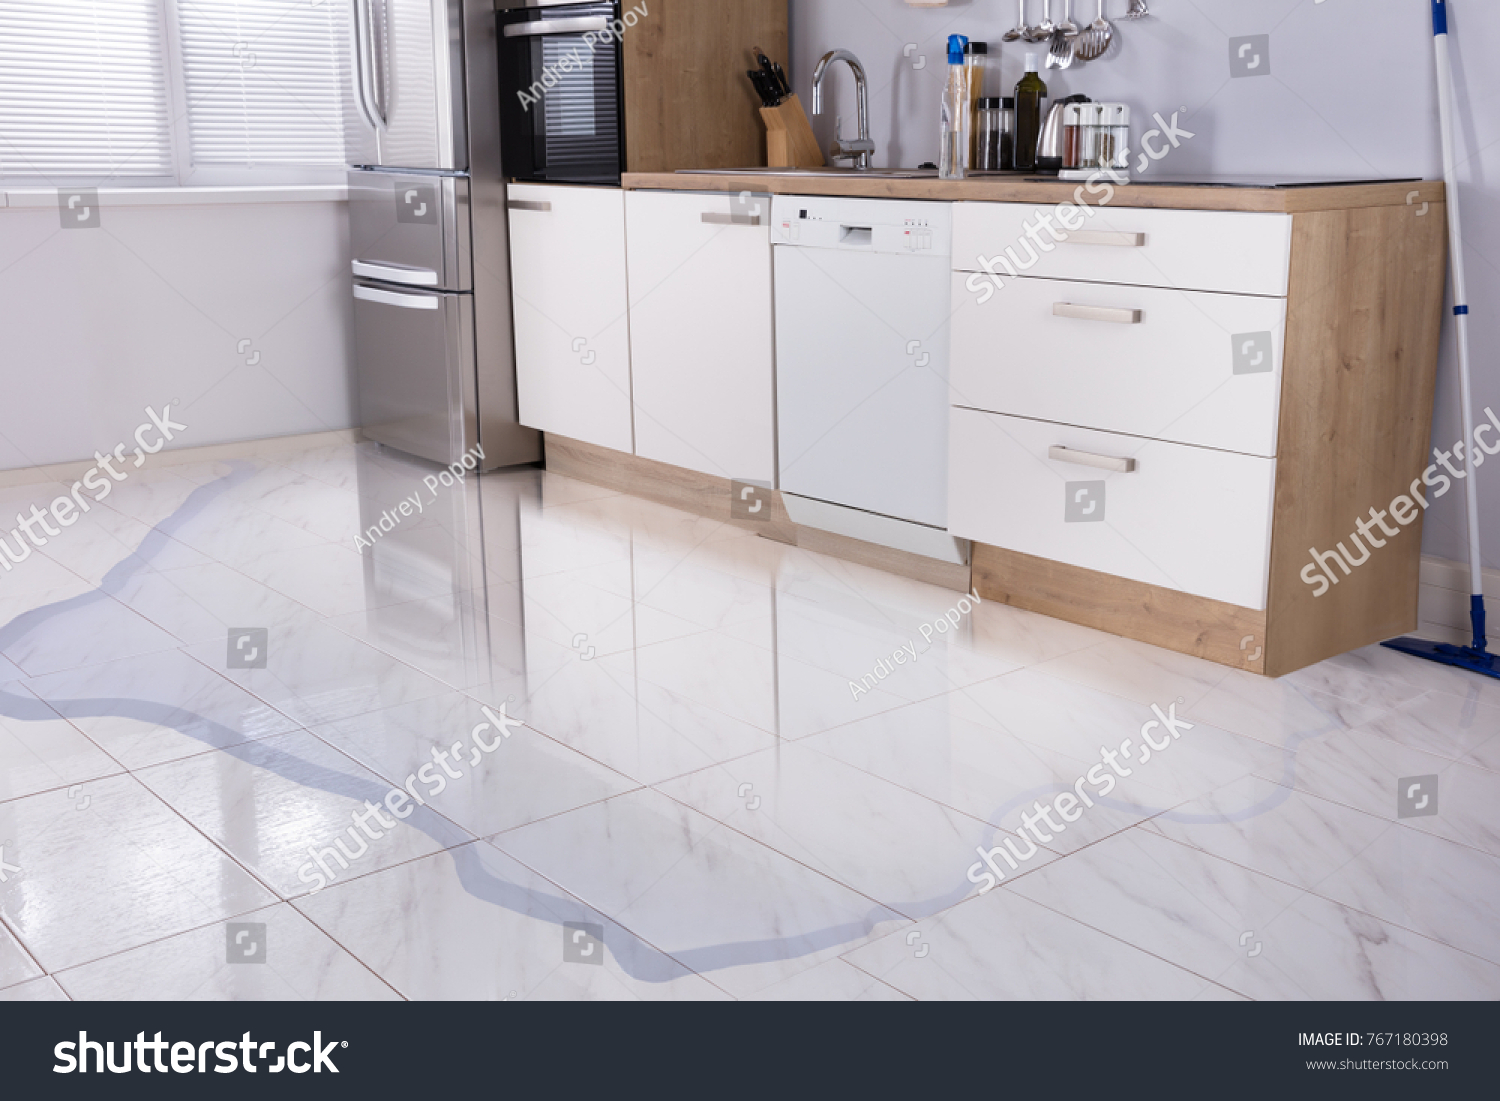 Close-up Photo Of Flooded Floor In Kitchen From Water Leak #767180398